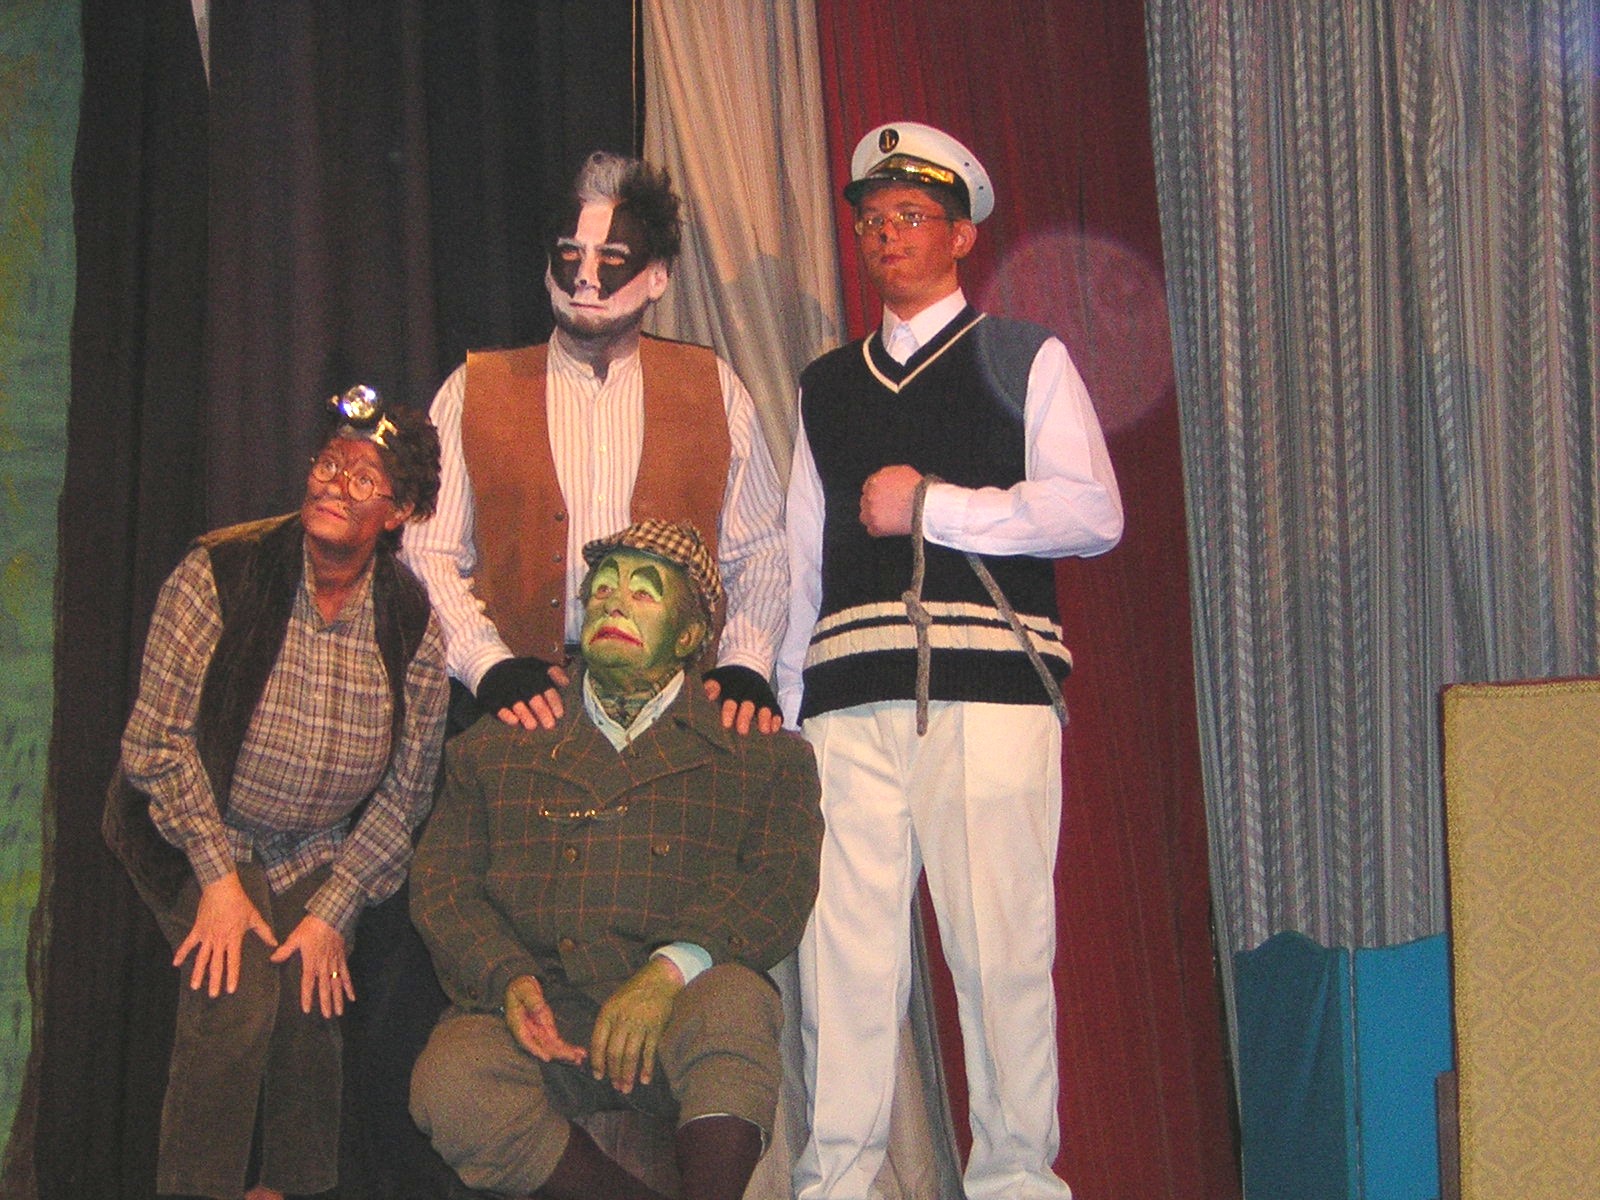 Clockwise, left to right: Gill Knight as Mole, Chris Knight as Badger, Jake Dove as Ratty and Mike Read as Toad in “Wind in the Willows”.